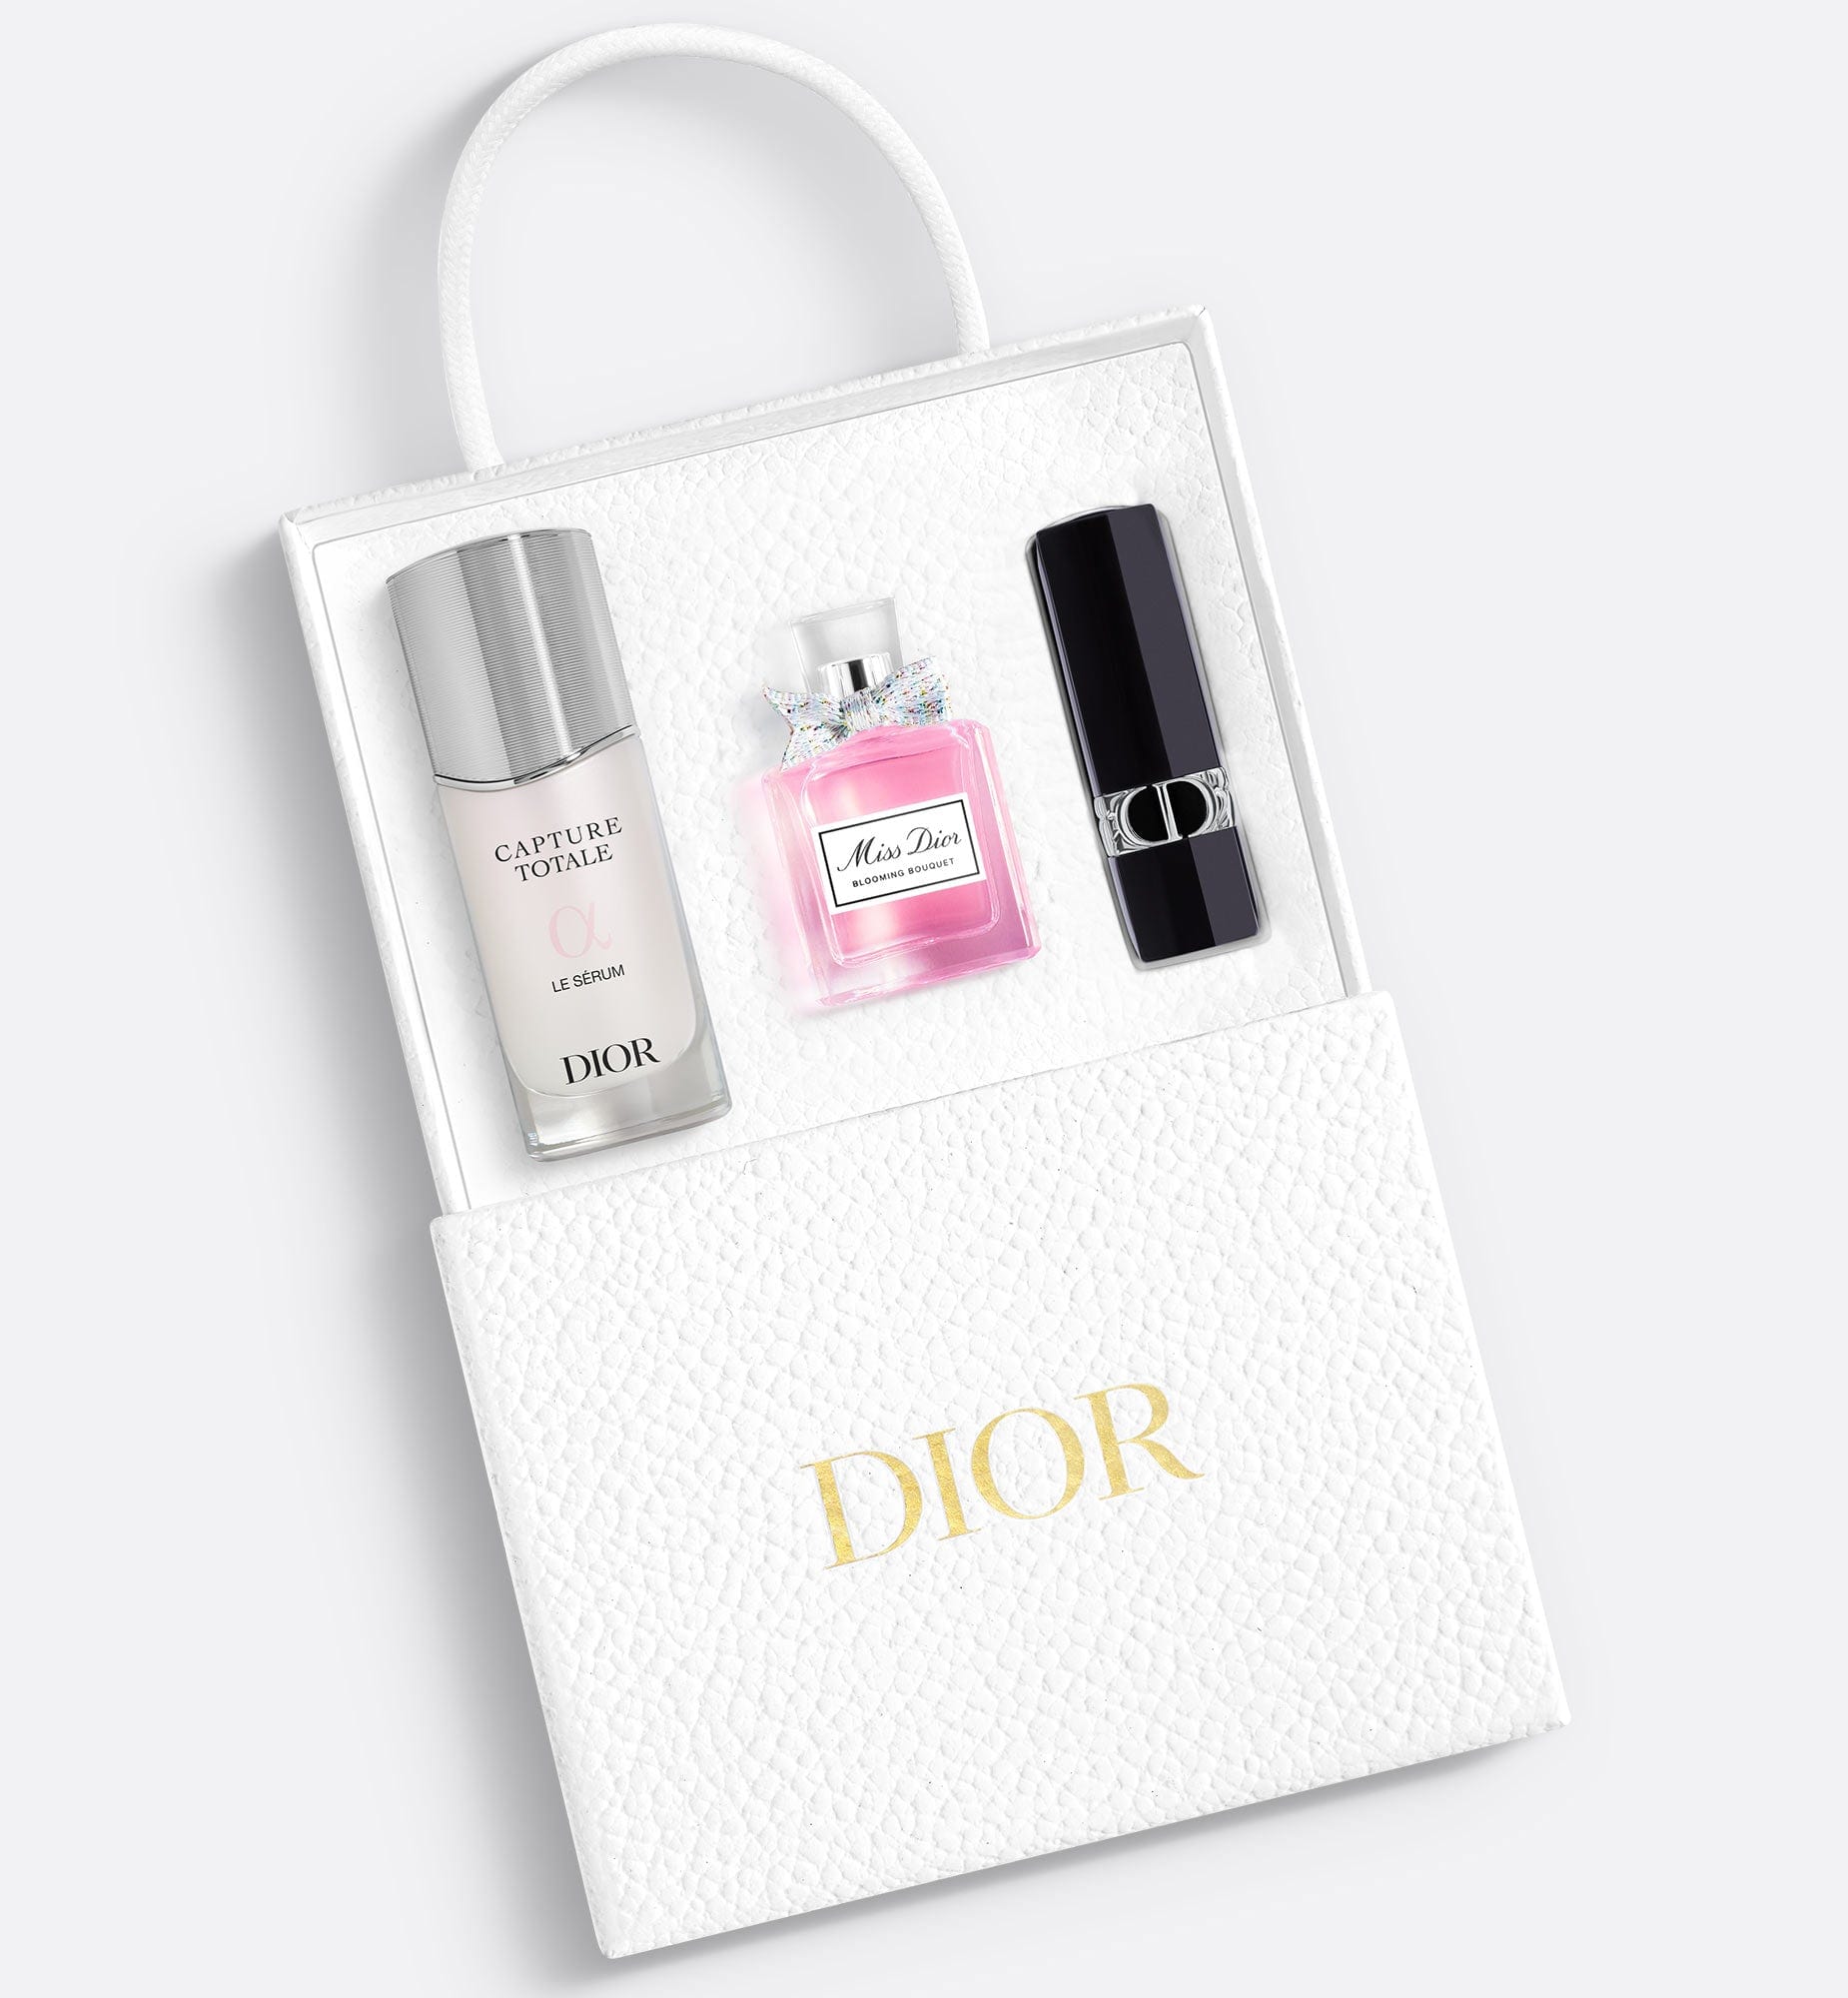 Buy Authentic Christian Dior Fragrance Gift Set 4 in 1 Set For Women 30ml   Discount Prices  Imported Perfumes Philippines